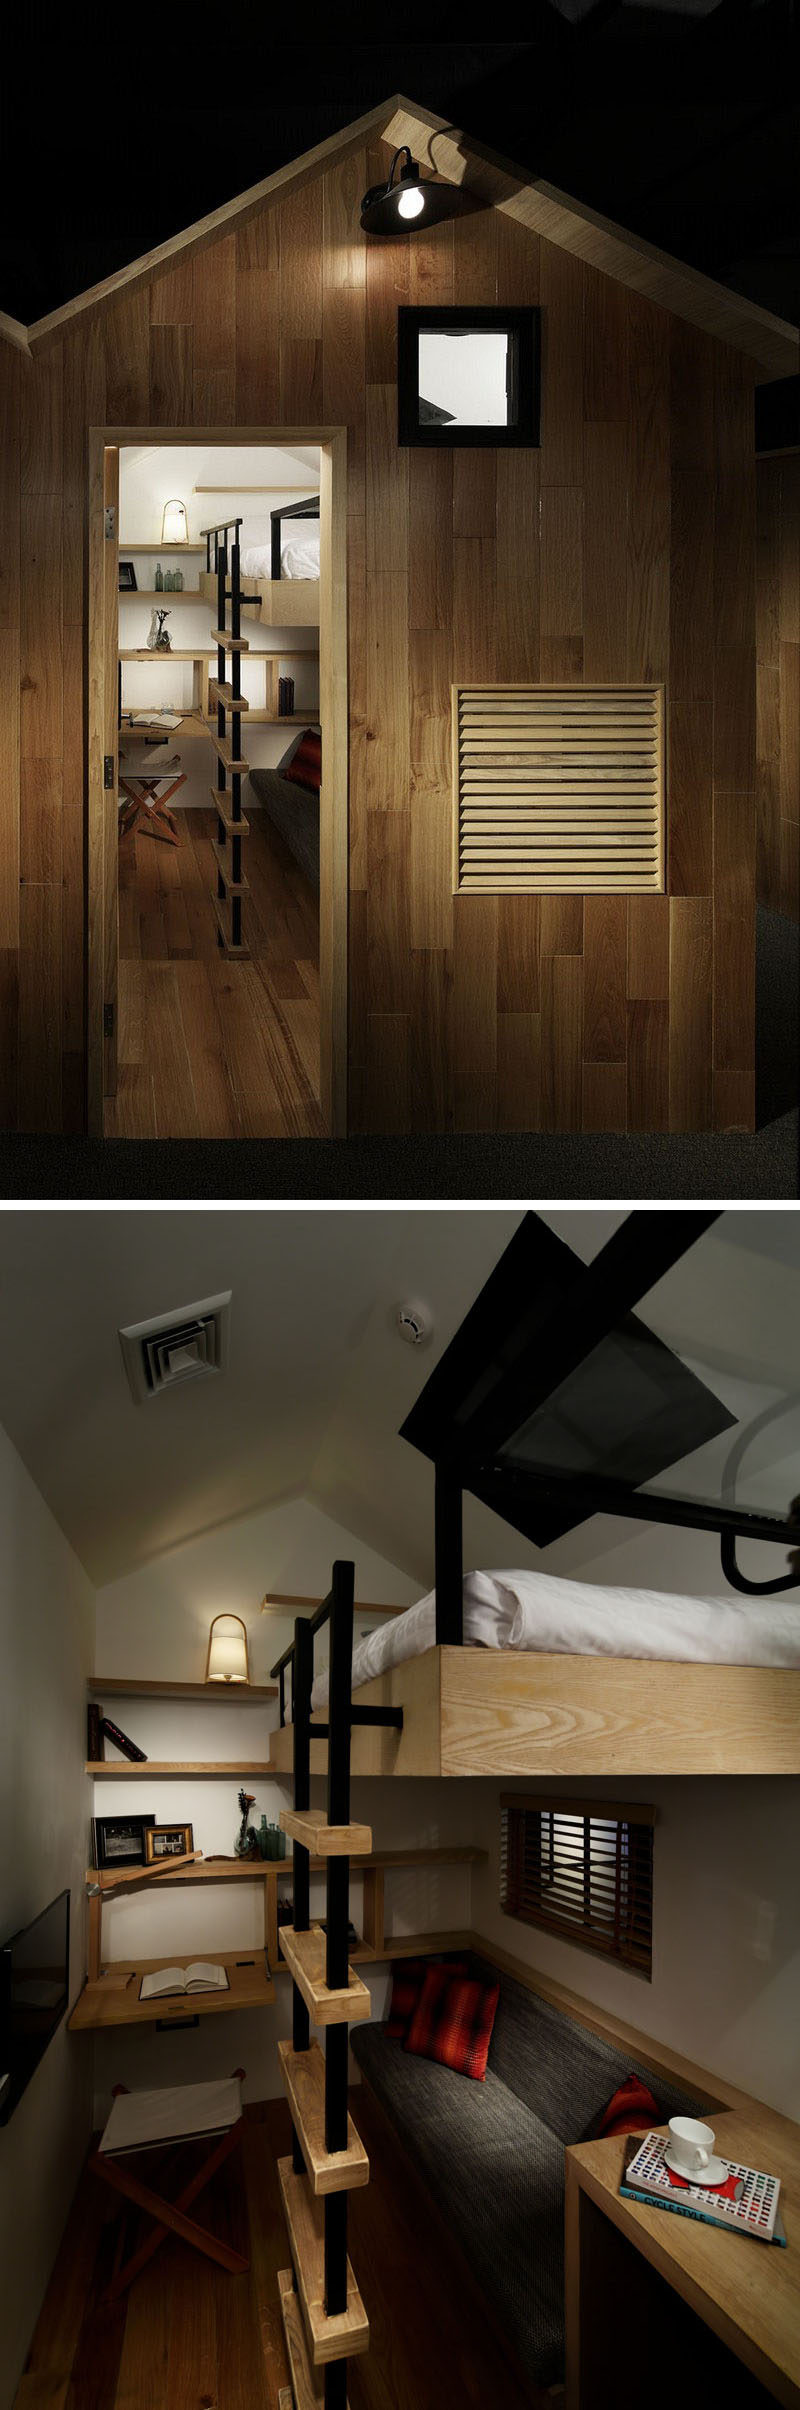 8 Small Hotel Rooms That Maximize Their Tiny Space // At this hotel, you sleep in your very own mini house. A lofted bed leaves space underneath for a couch, and a fold up desk creates a work space that's just the right size for writing, working on a laptop, or doing some sketching.